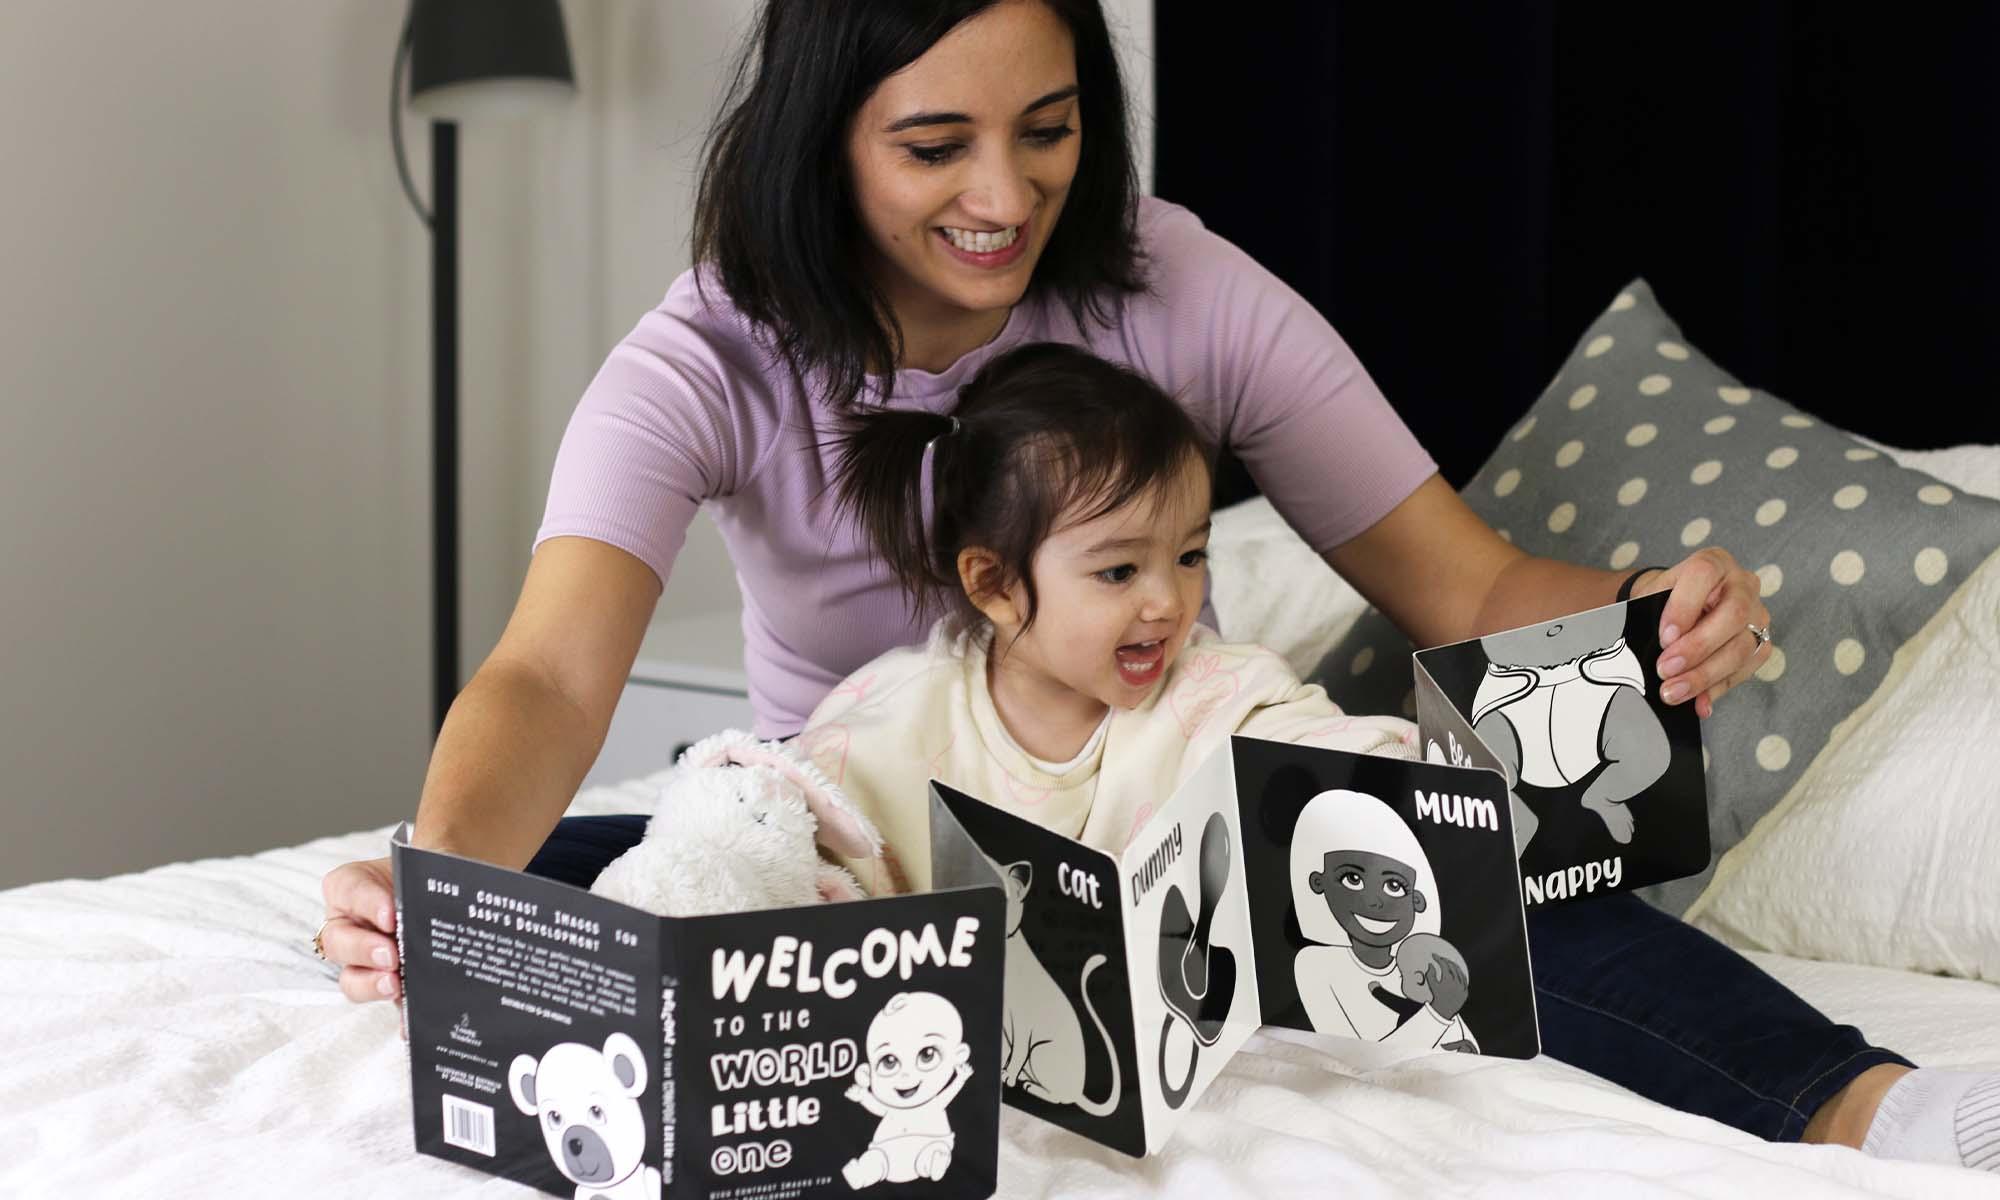 Why is black and white good for babies?